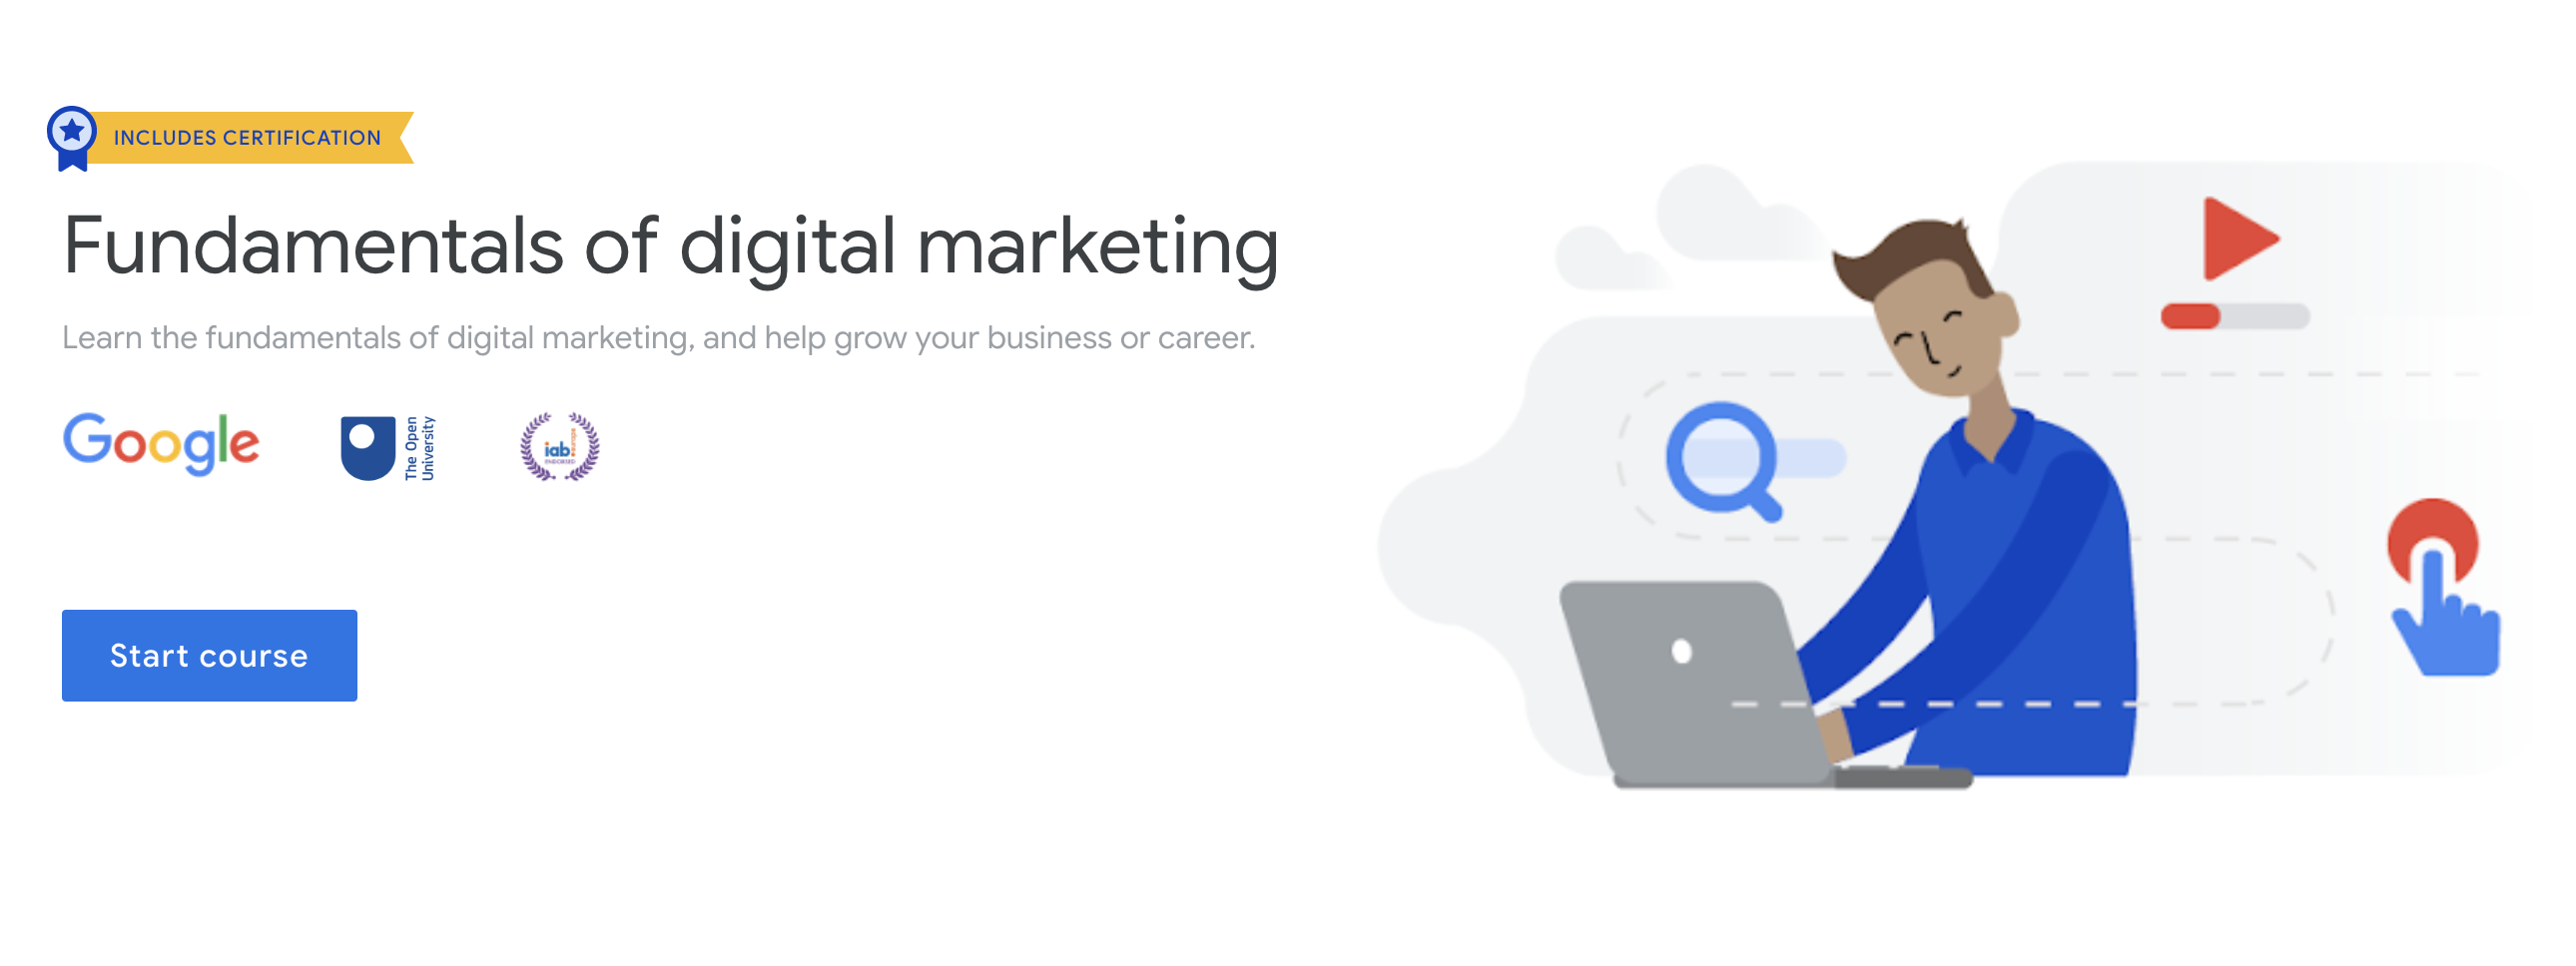 Google Launches A New Certificate For Digital Marketing